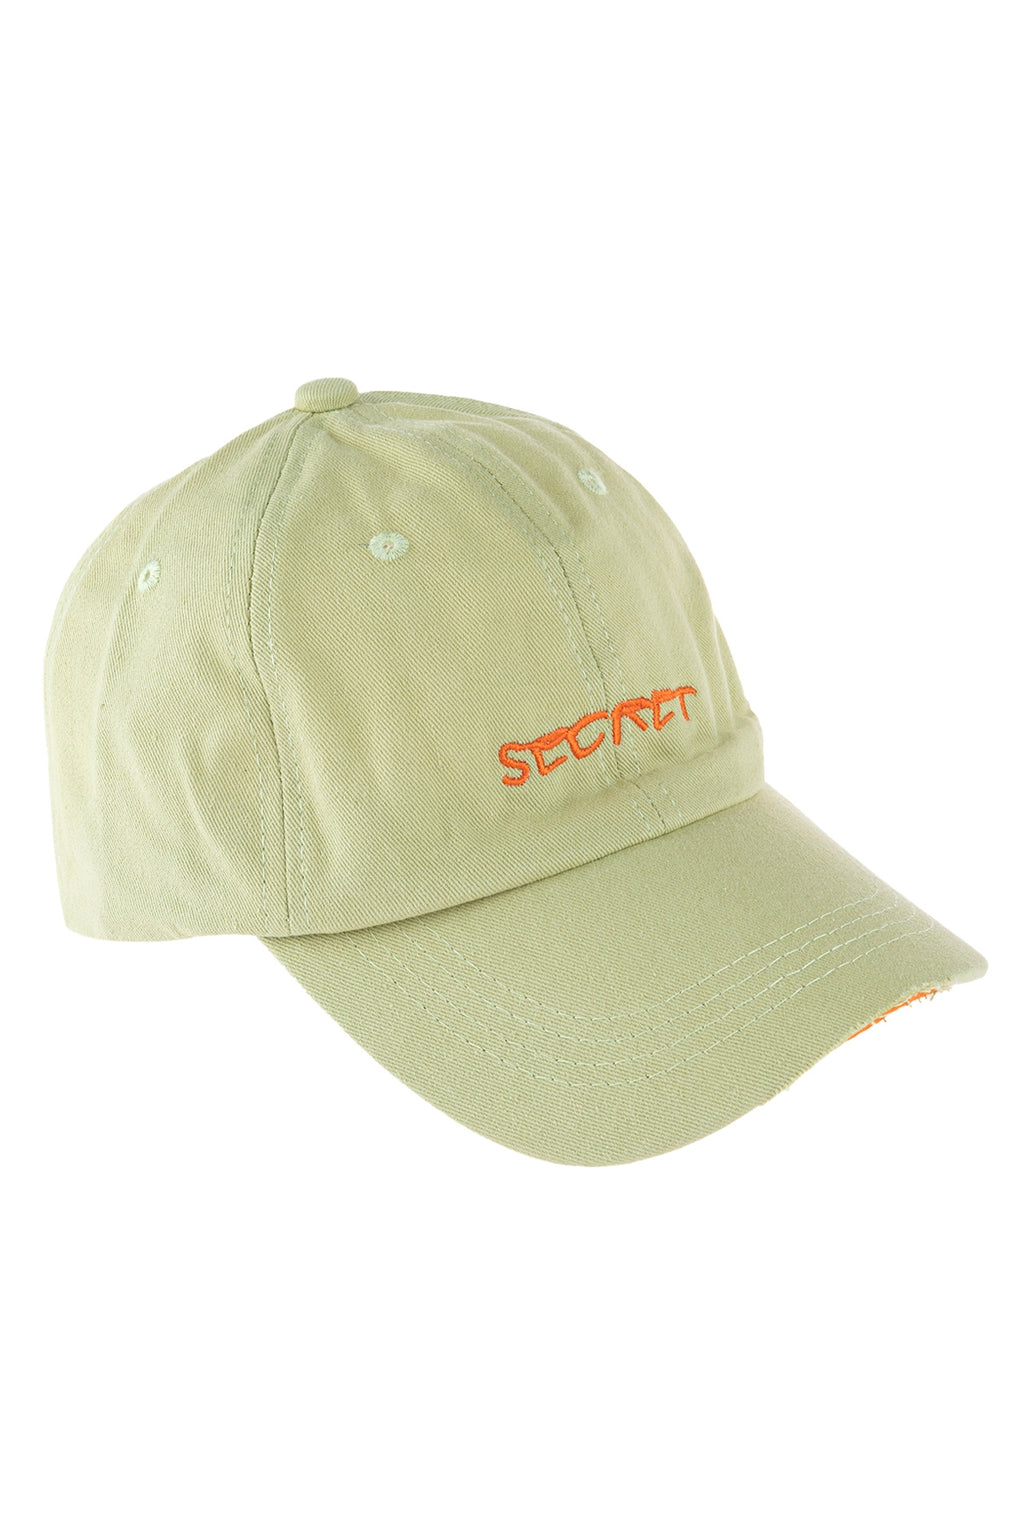 Secret Embroidered Cap Mint - Pack of 6